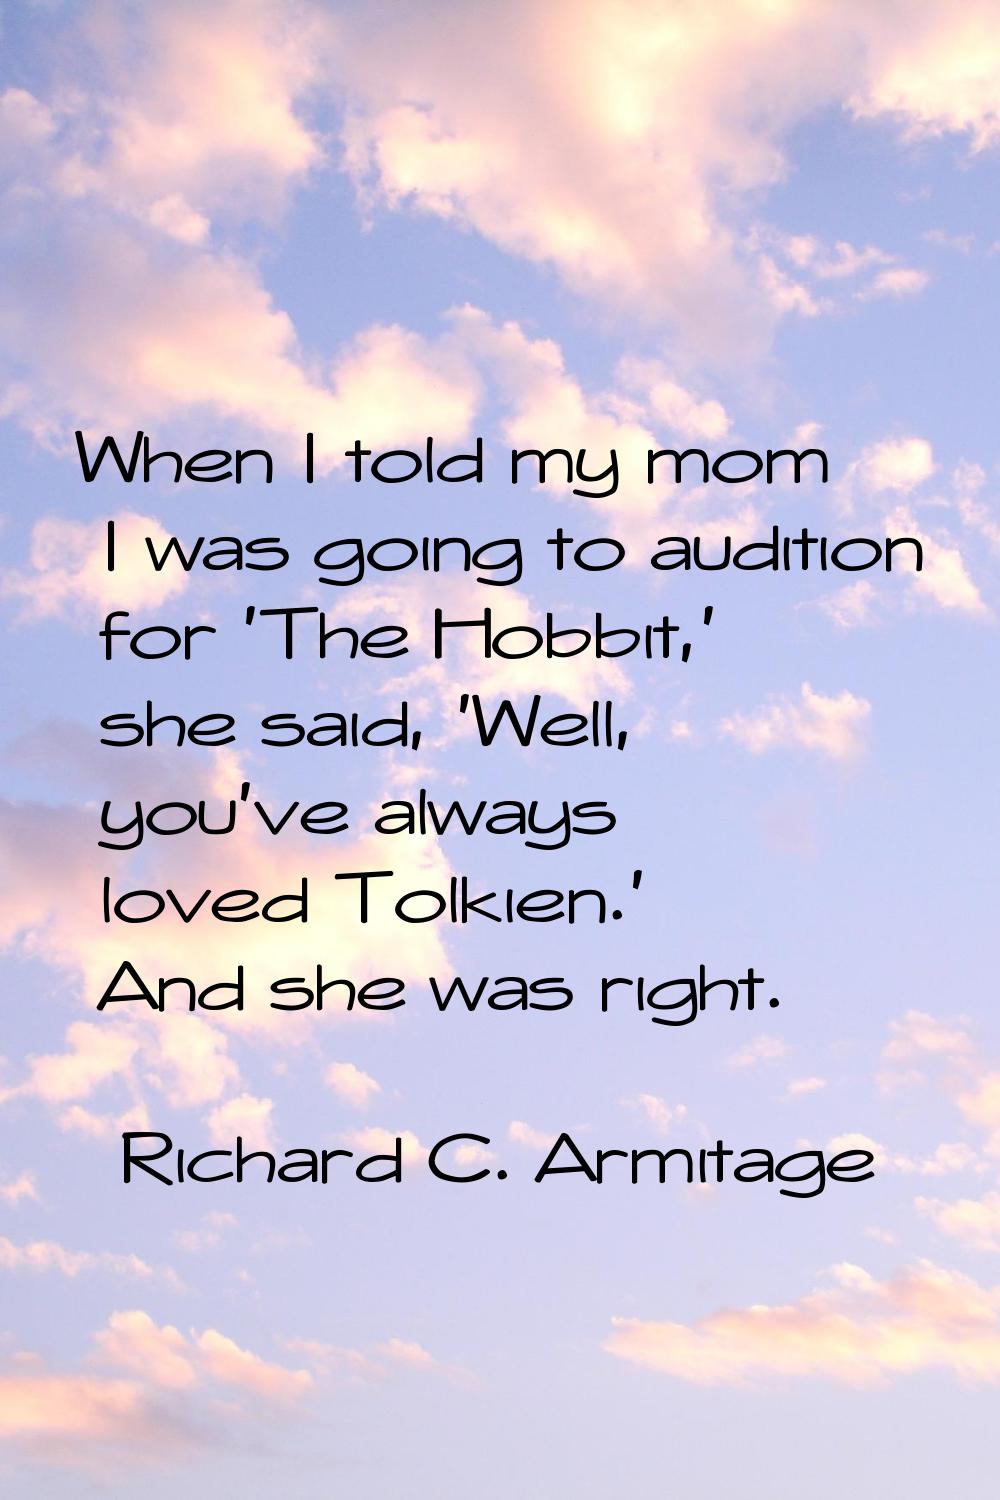 When I told my mom I was going to audition for 'The Hobbit,' she said, 'Well, you've always loved T